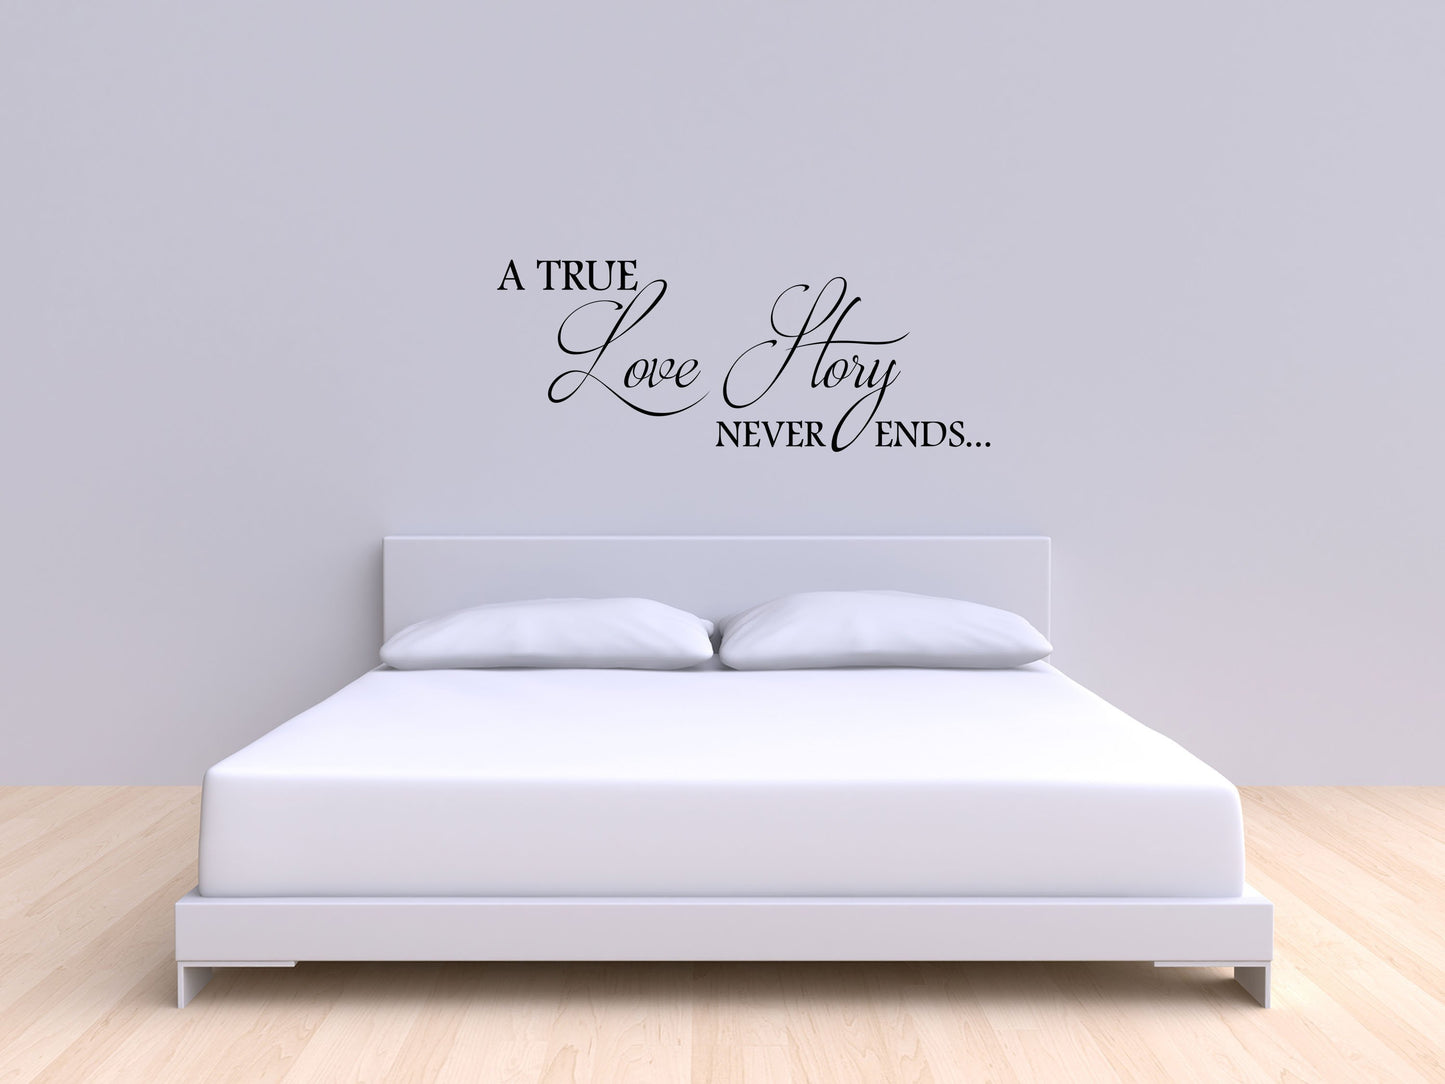 A True Love Story Never Ends Bedroom Marriage Sticker- Inspirational Wall Decals Vinyl Wall Decal Done 